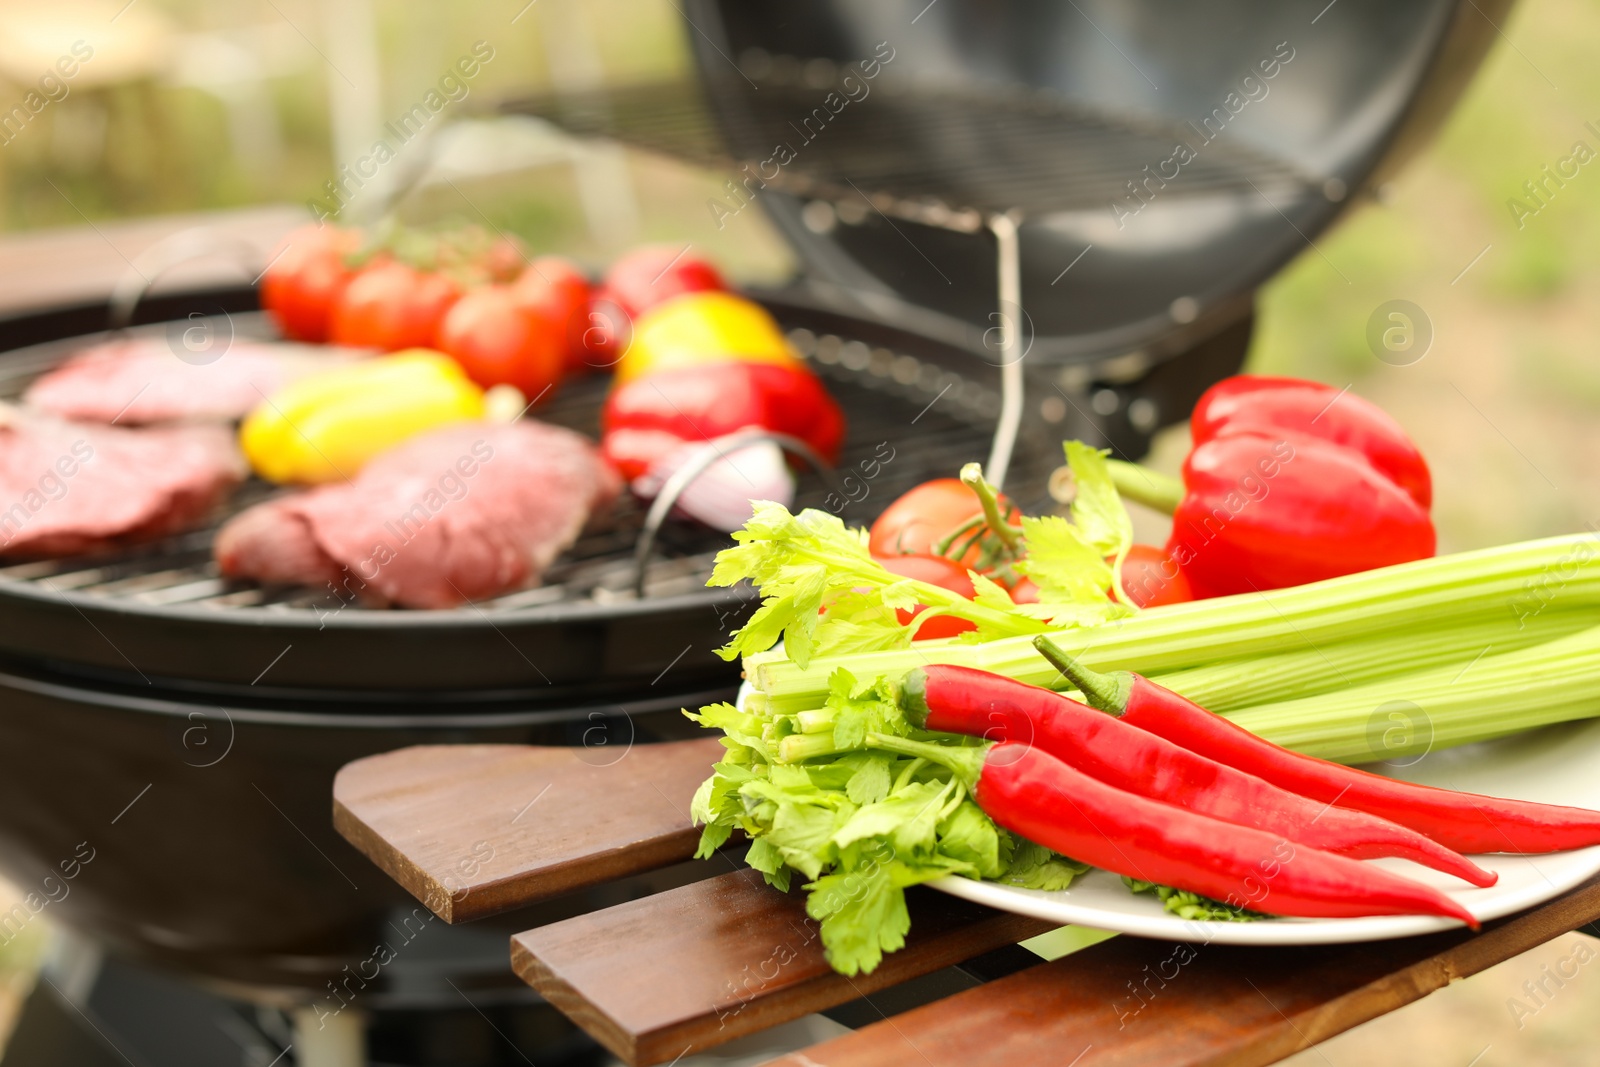 Photo of Plate with vegetables near barbecue grill outdoors, closeup